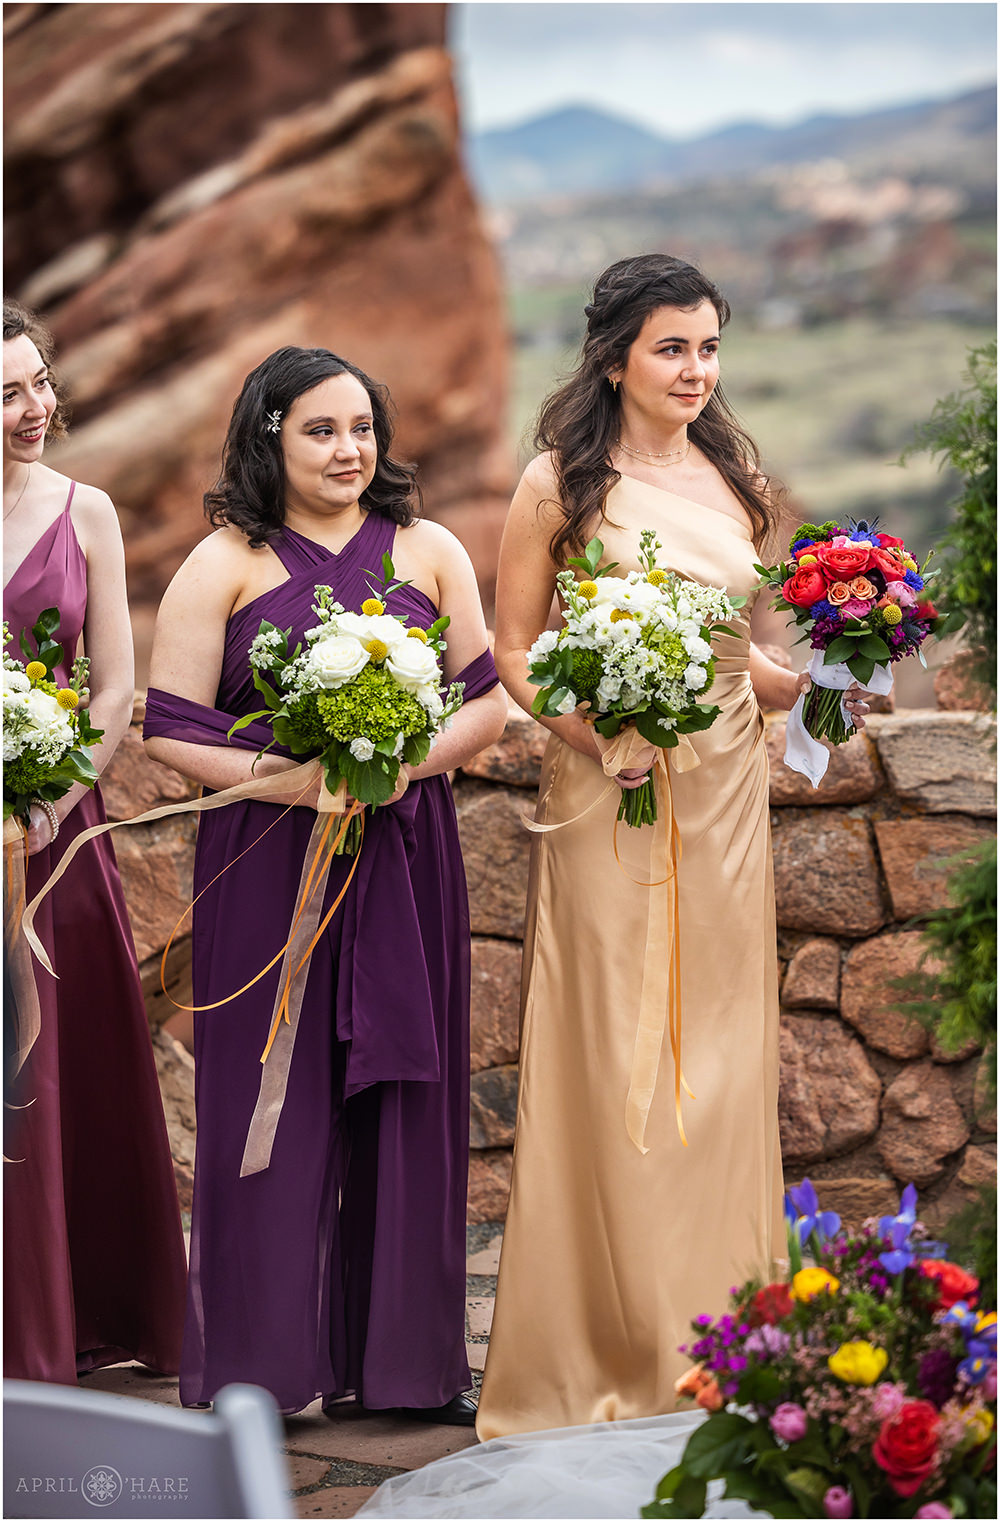 Maid of honor and bridesmaids stand during wedding ceremony at Red Rocks